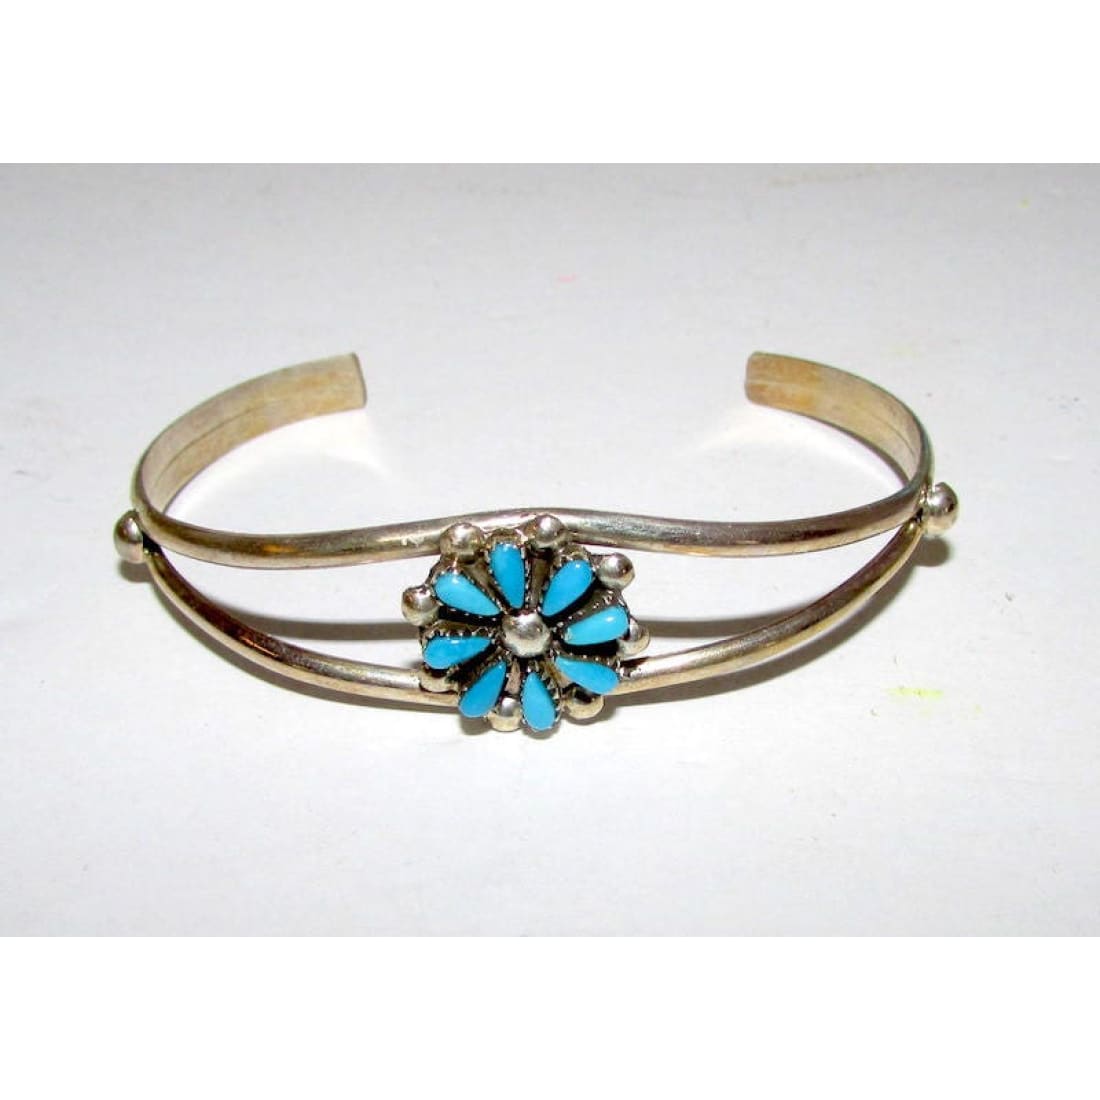 ZUNI Sterling Silver Turquoise Cluster Cuff Bracelet  D.S. Leekity Signed Native American The Southwestern Style Gallery